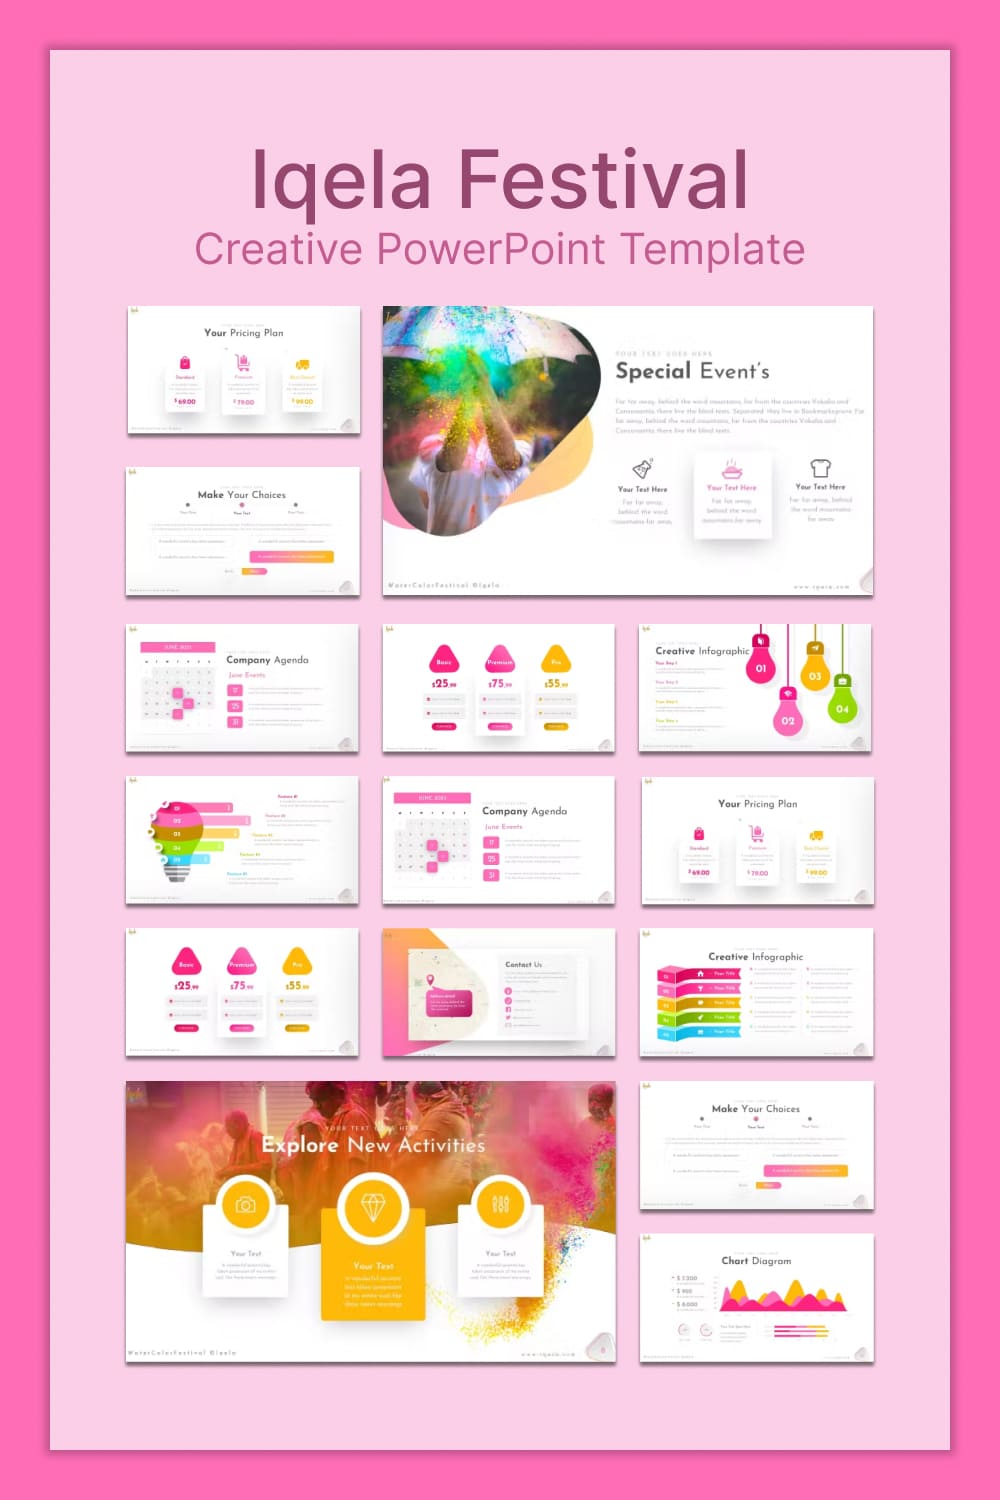 Iqela festival creative powerpoint template - pinterest image preview.